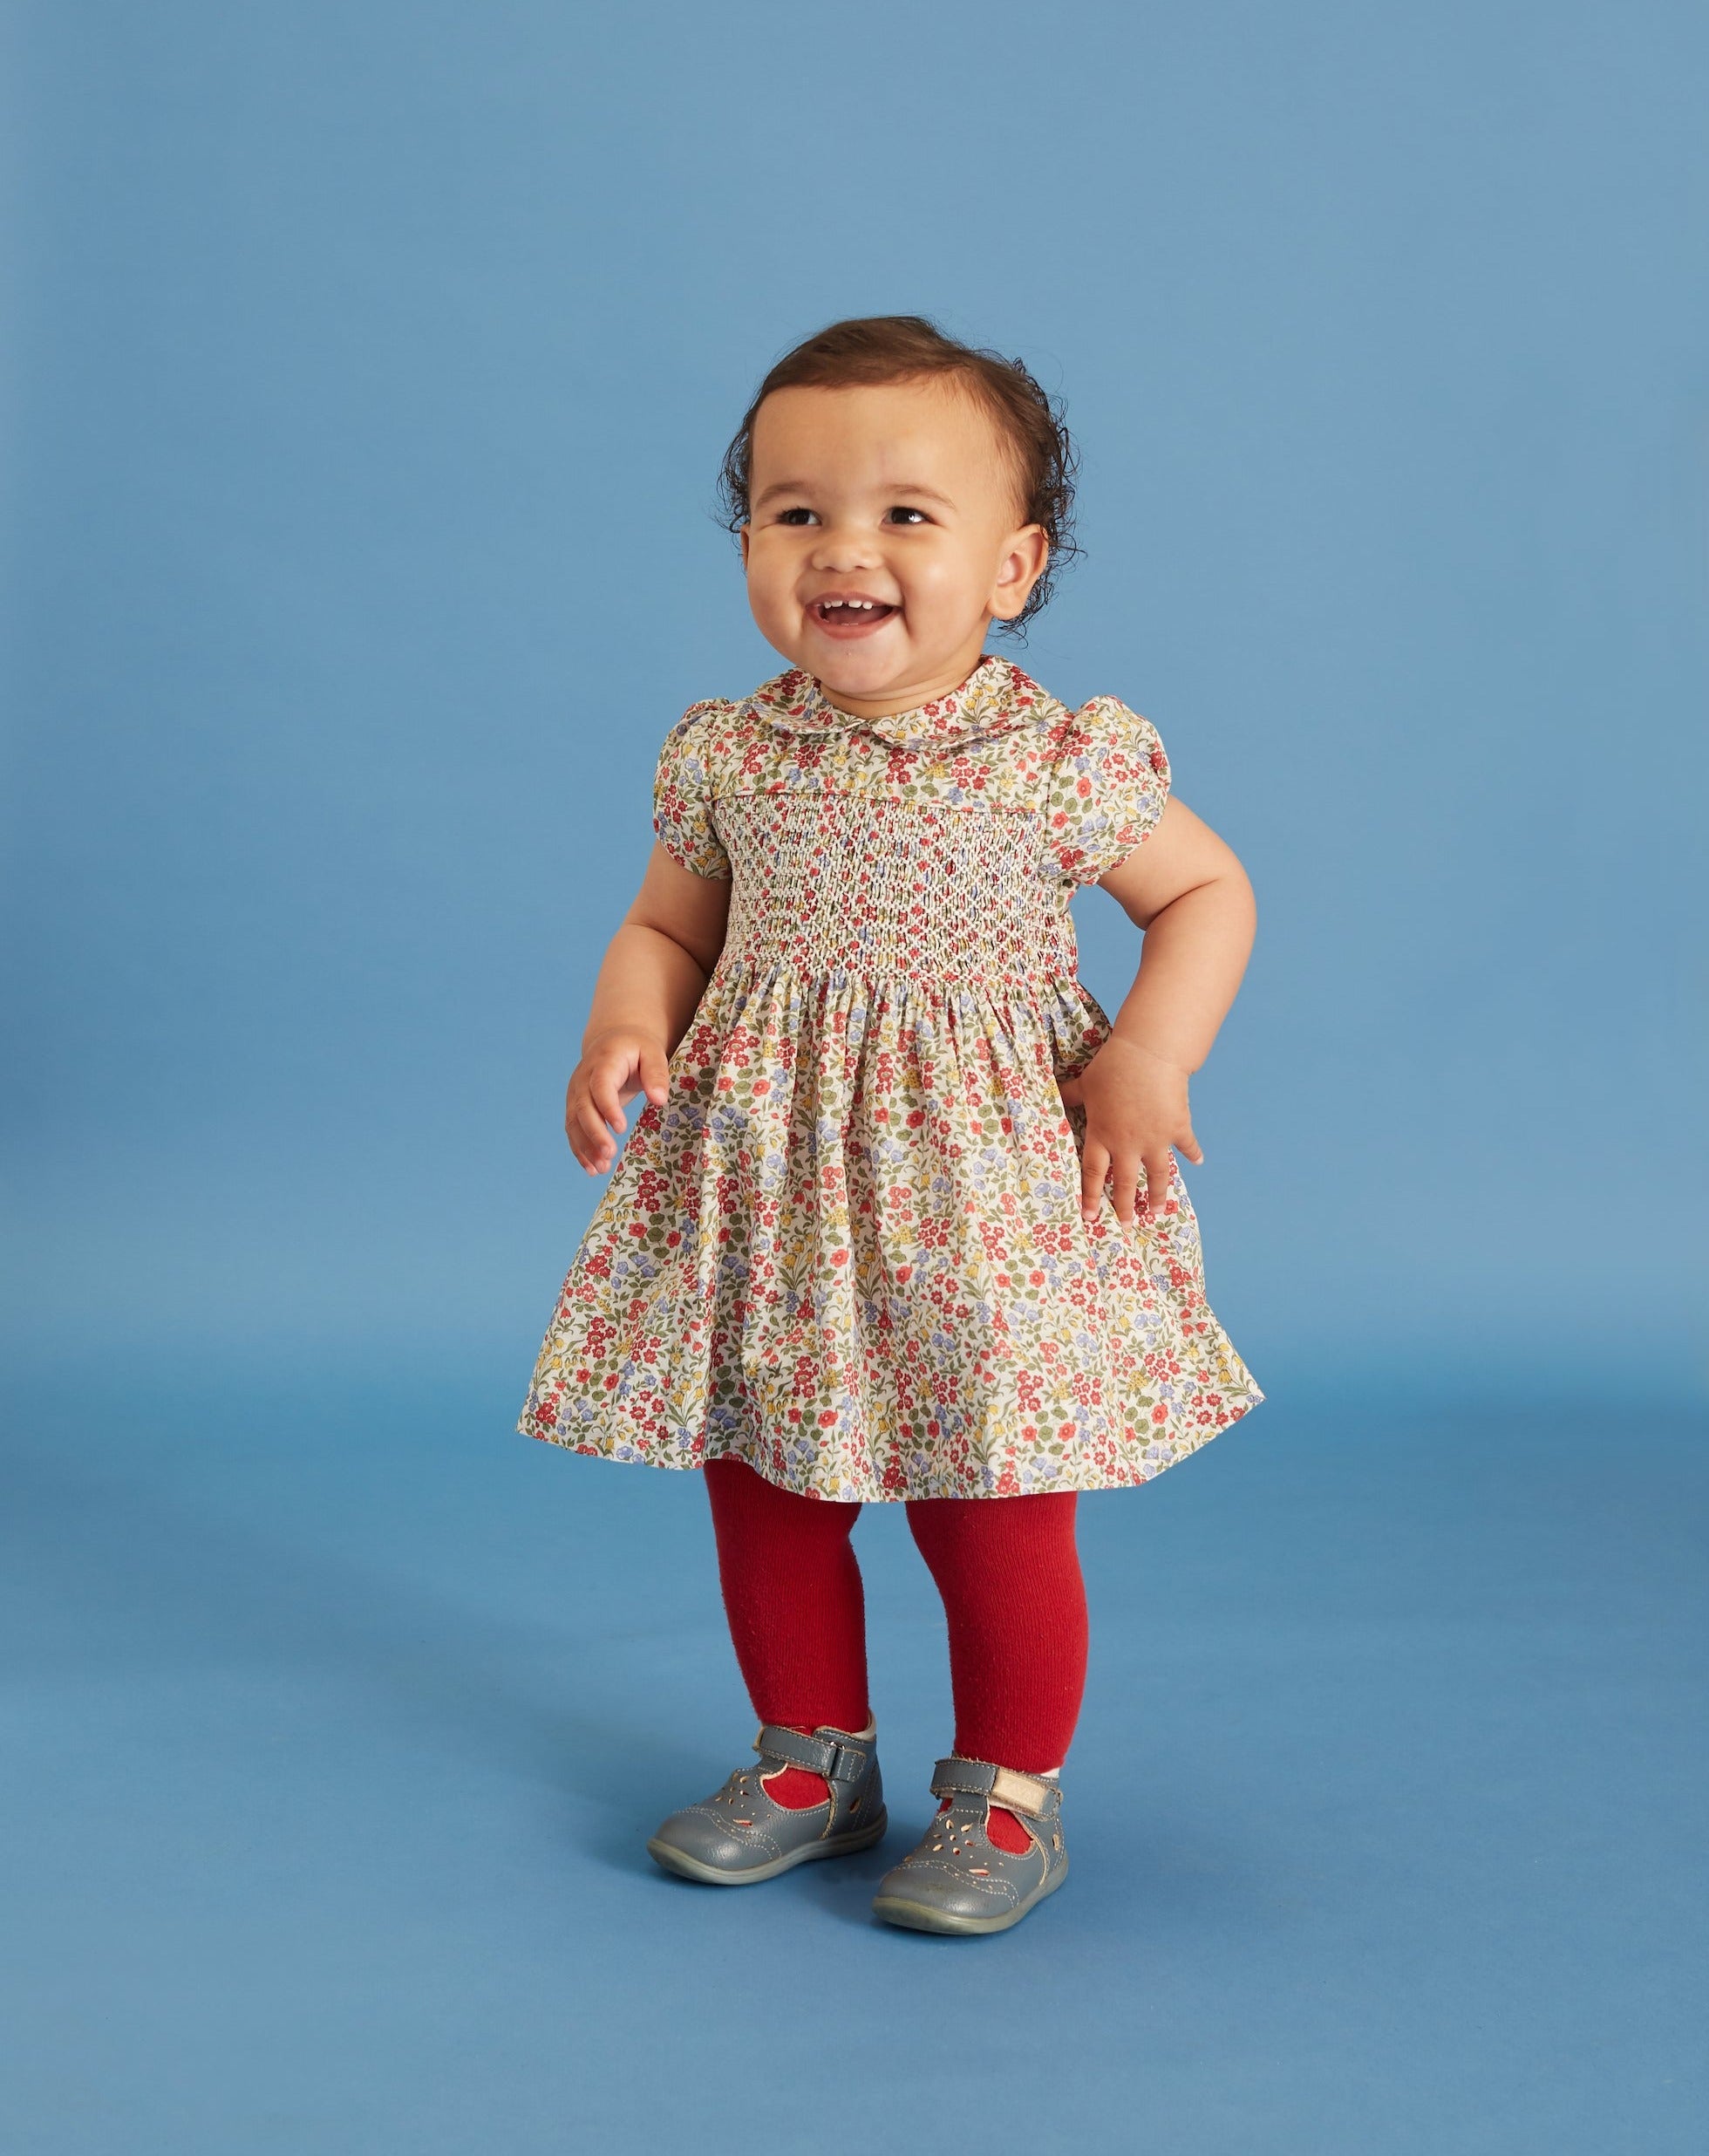 toddler in hand-smocked Liberty fabric dress